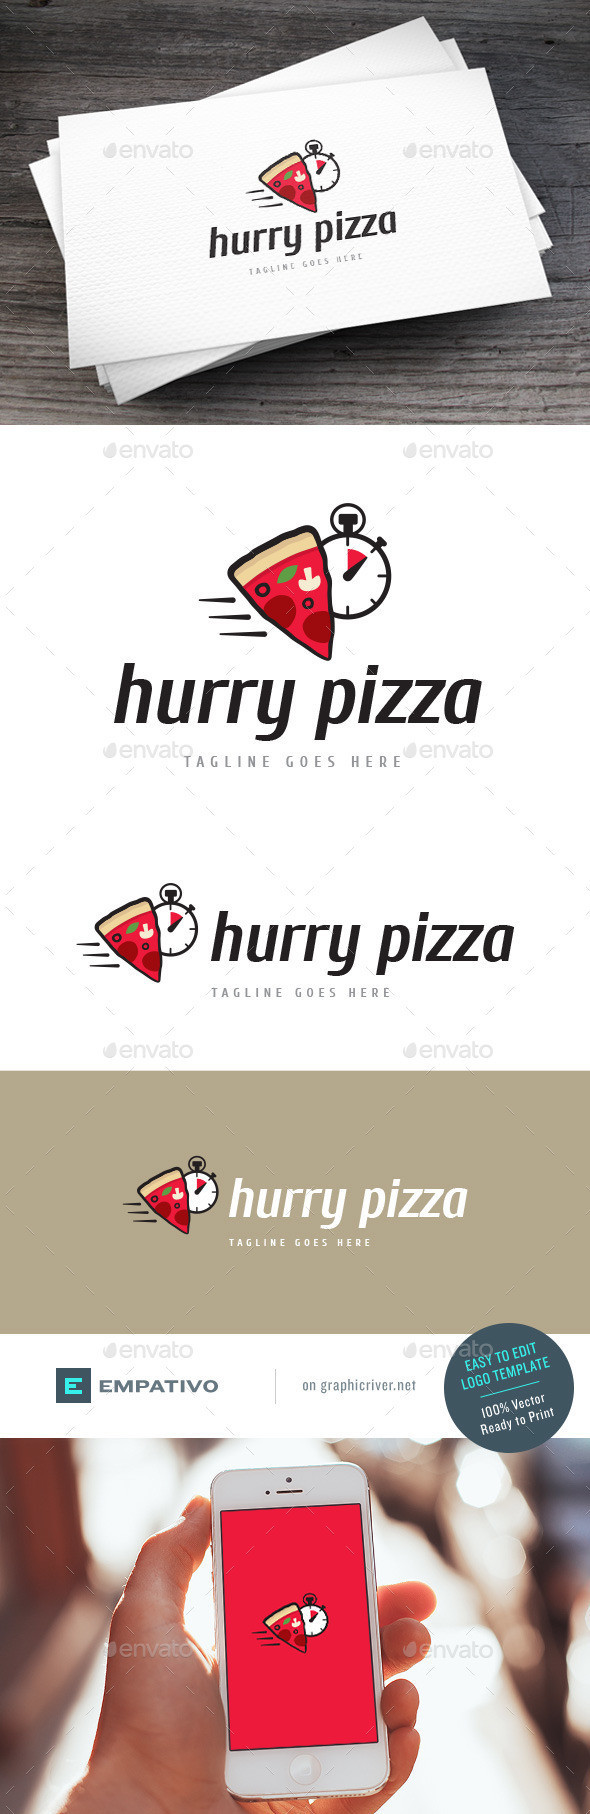 Hurry pizza logo template